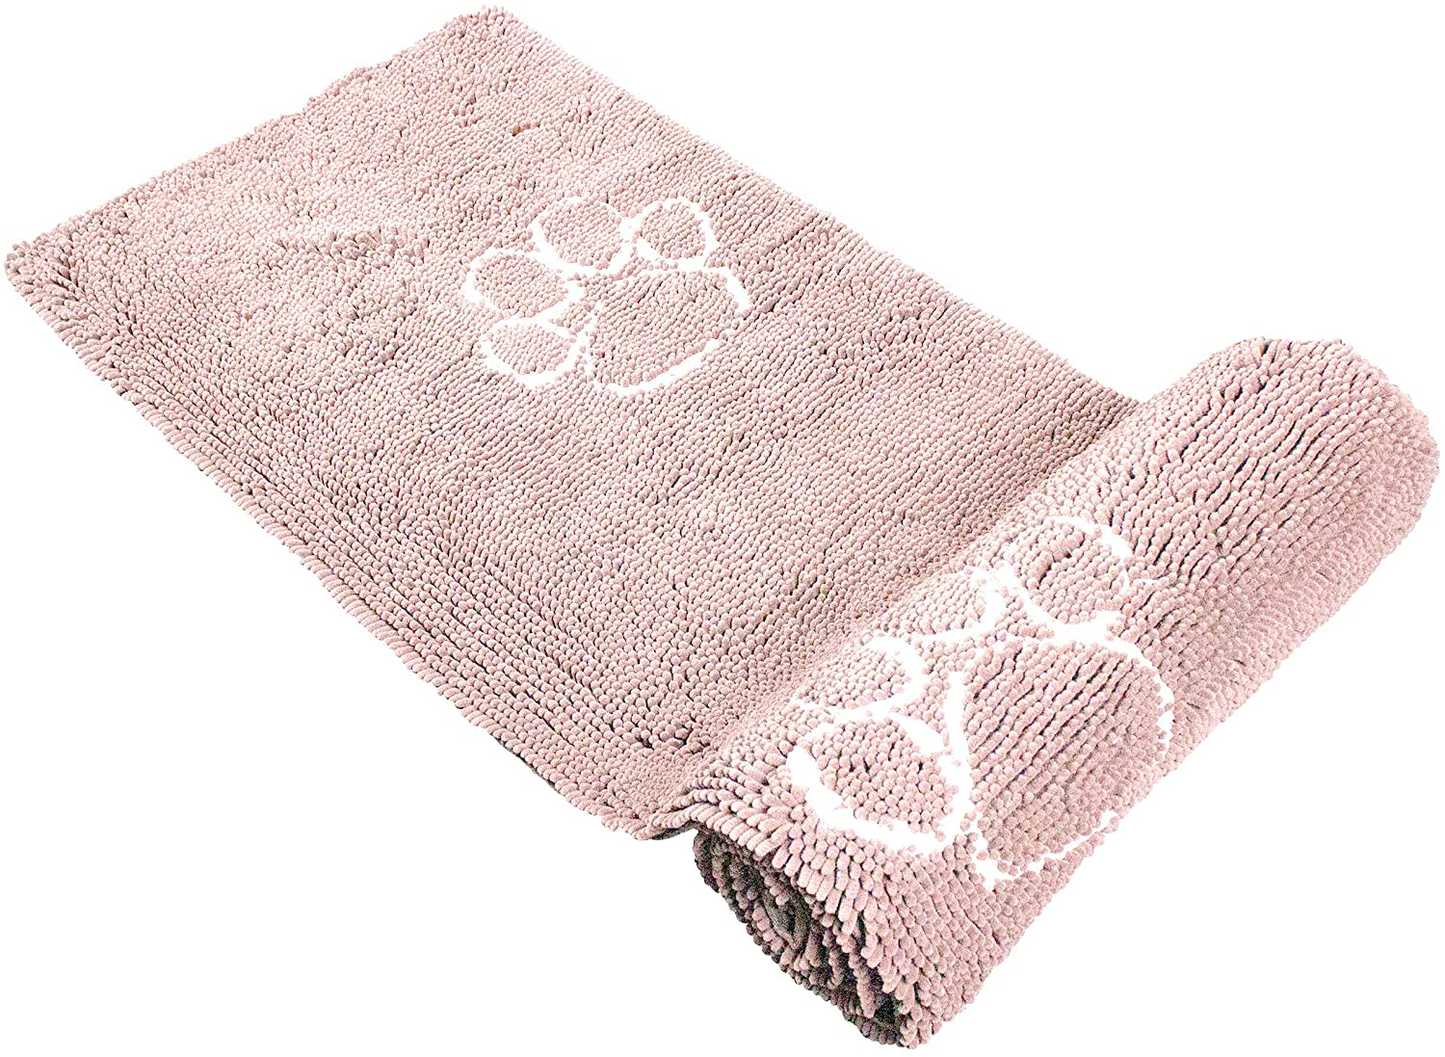 My Doggy Place - Ultra Absorbent Microfiber Dog Door Mat, Durable, Quick Drying, Washable, Prevent Mud Dirt, Keep Your House Clean (Pink W/Paw Print, Hallway Runner) - 8' X 2' Feet